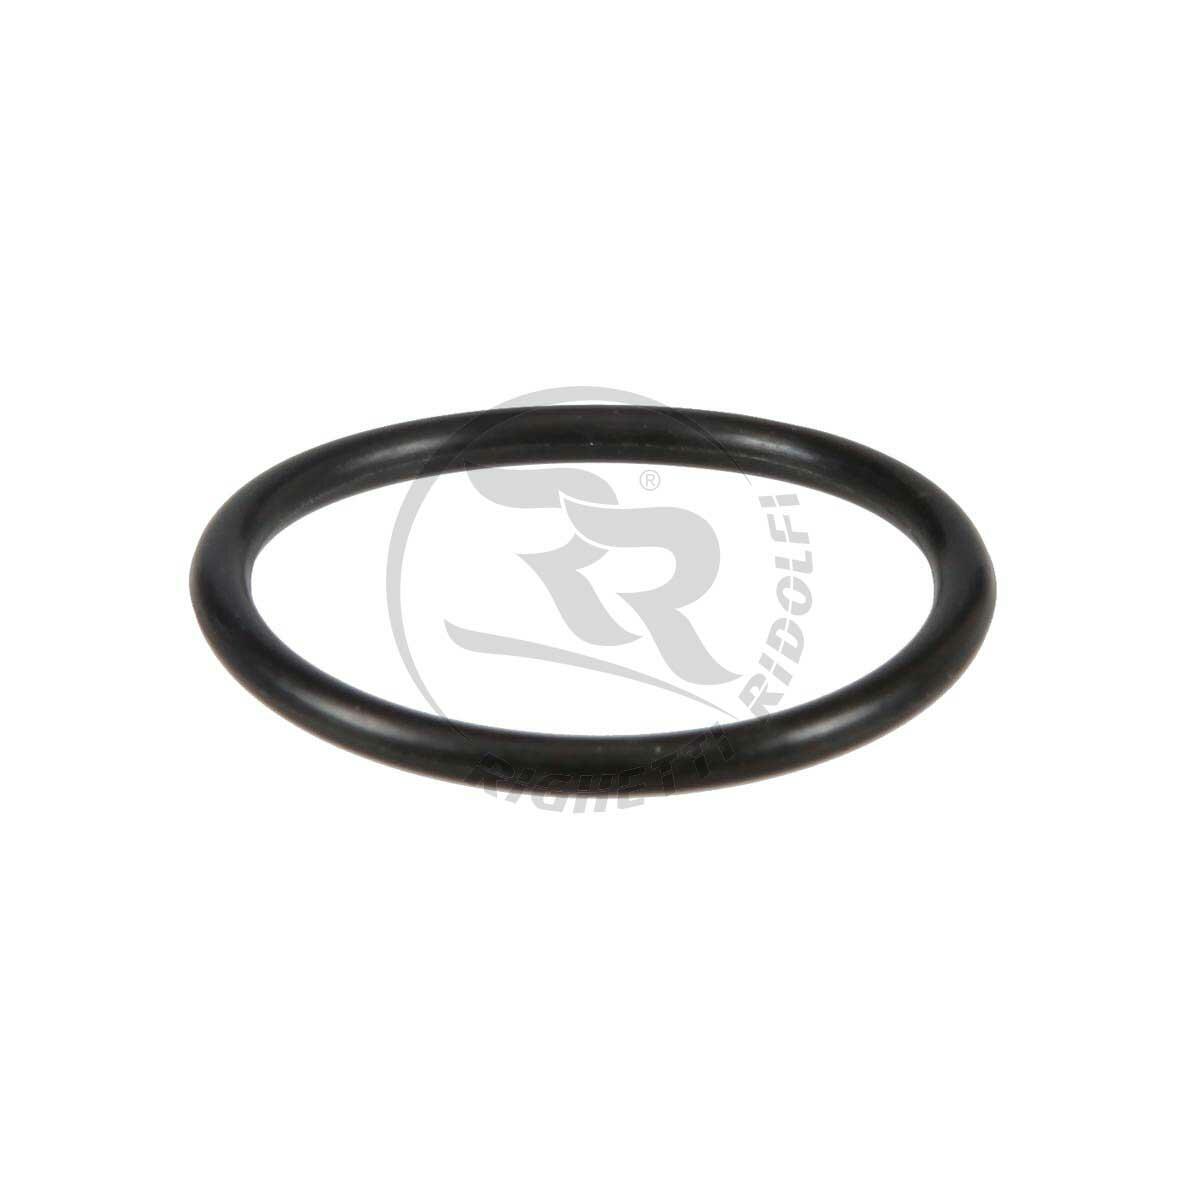 Picture of O-ring 44,12x2,62 NBR 70 for water pump cap.